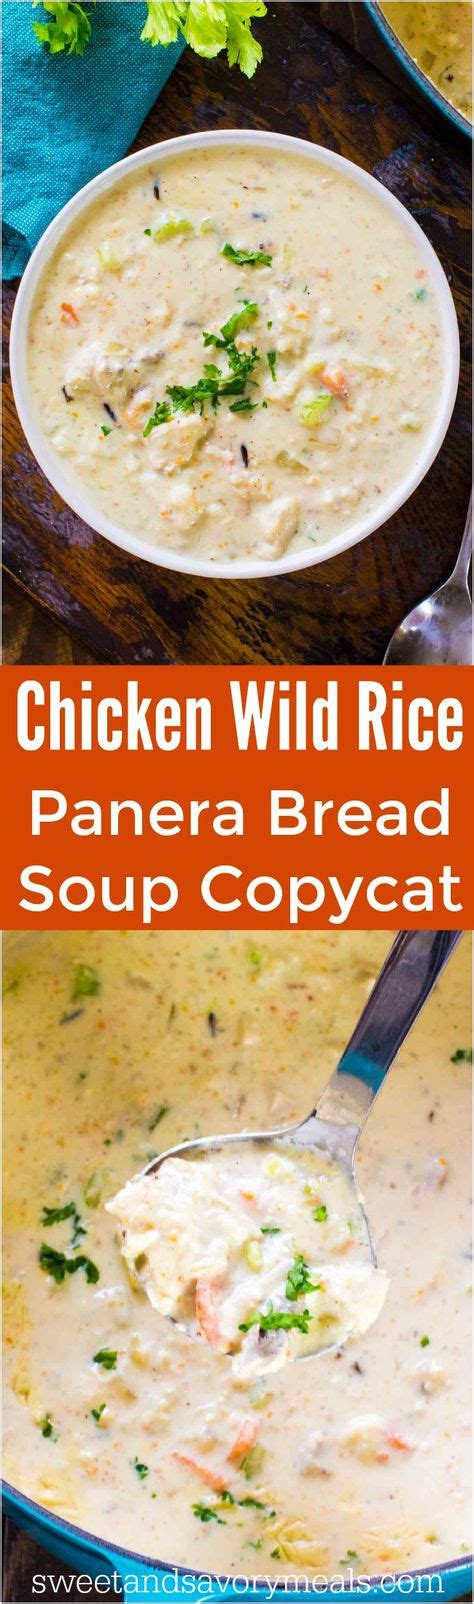 This is a copycat recipe, with ingredients that match panera's wild rice soup. Panera Bread Chicken Wild Rice Soup | Recipe (With images ...